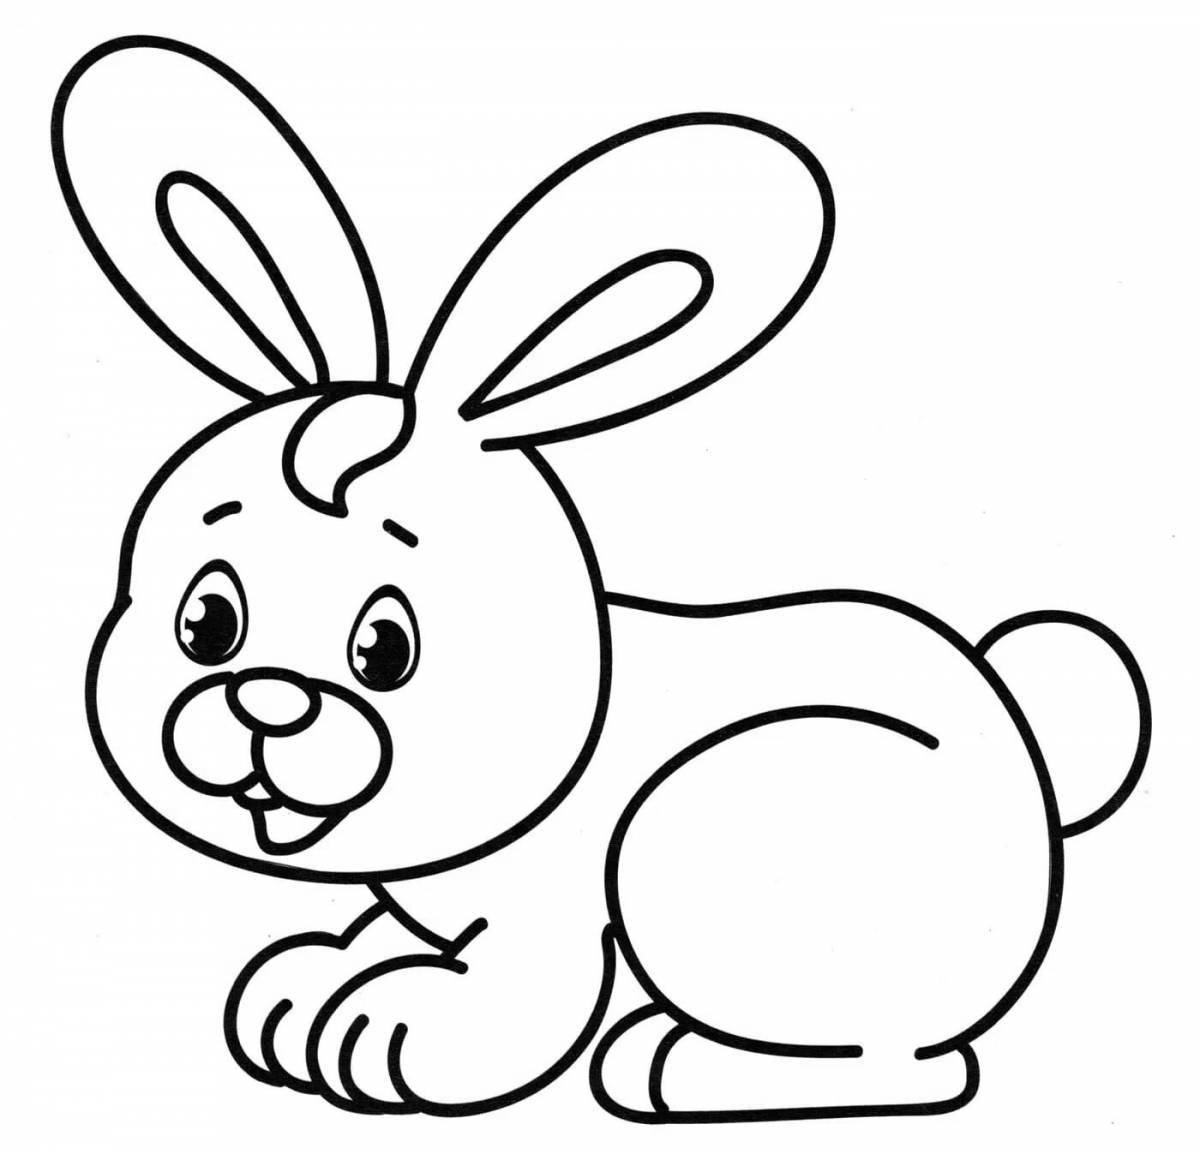 Blessed Bunny coloring pages for kids